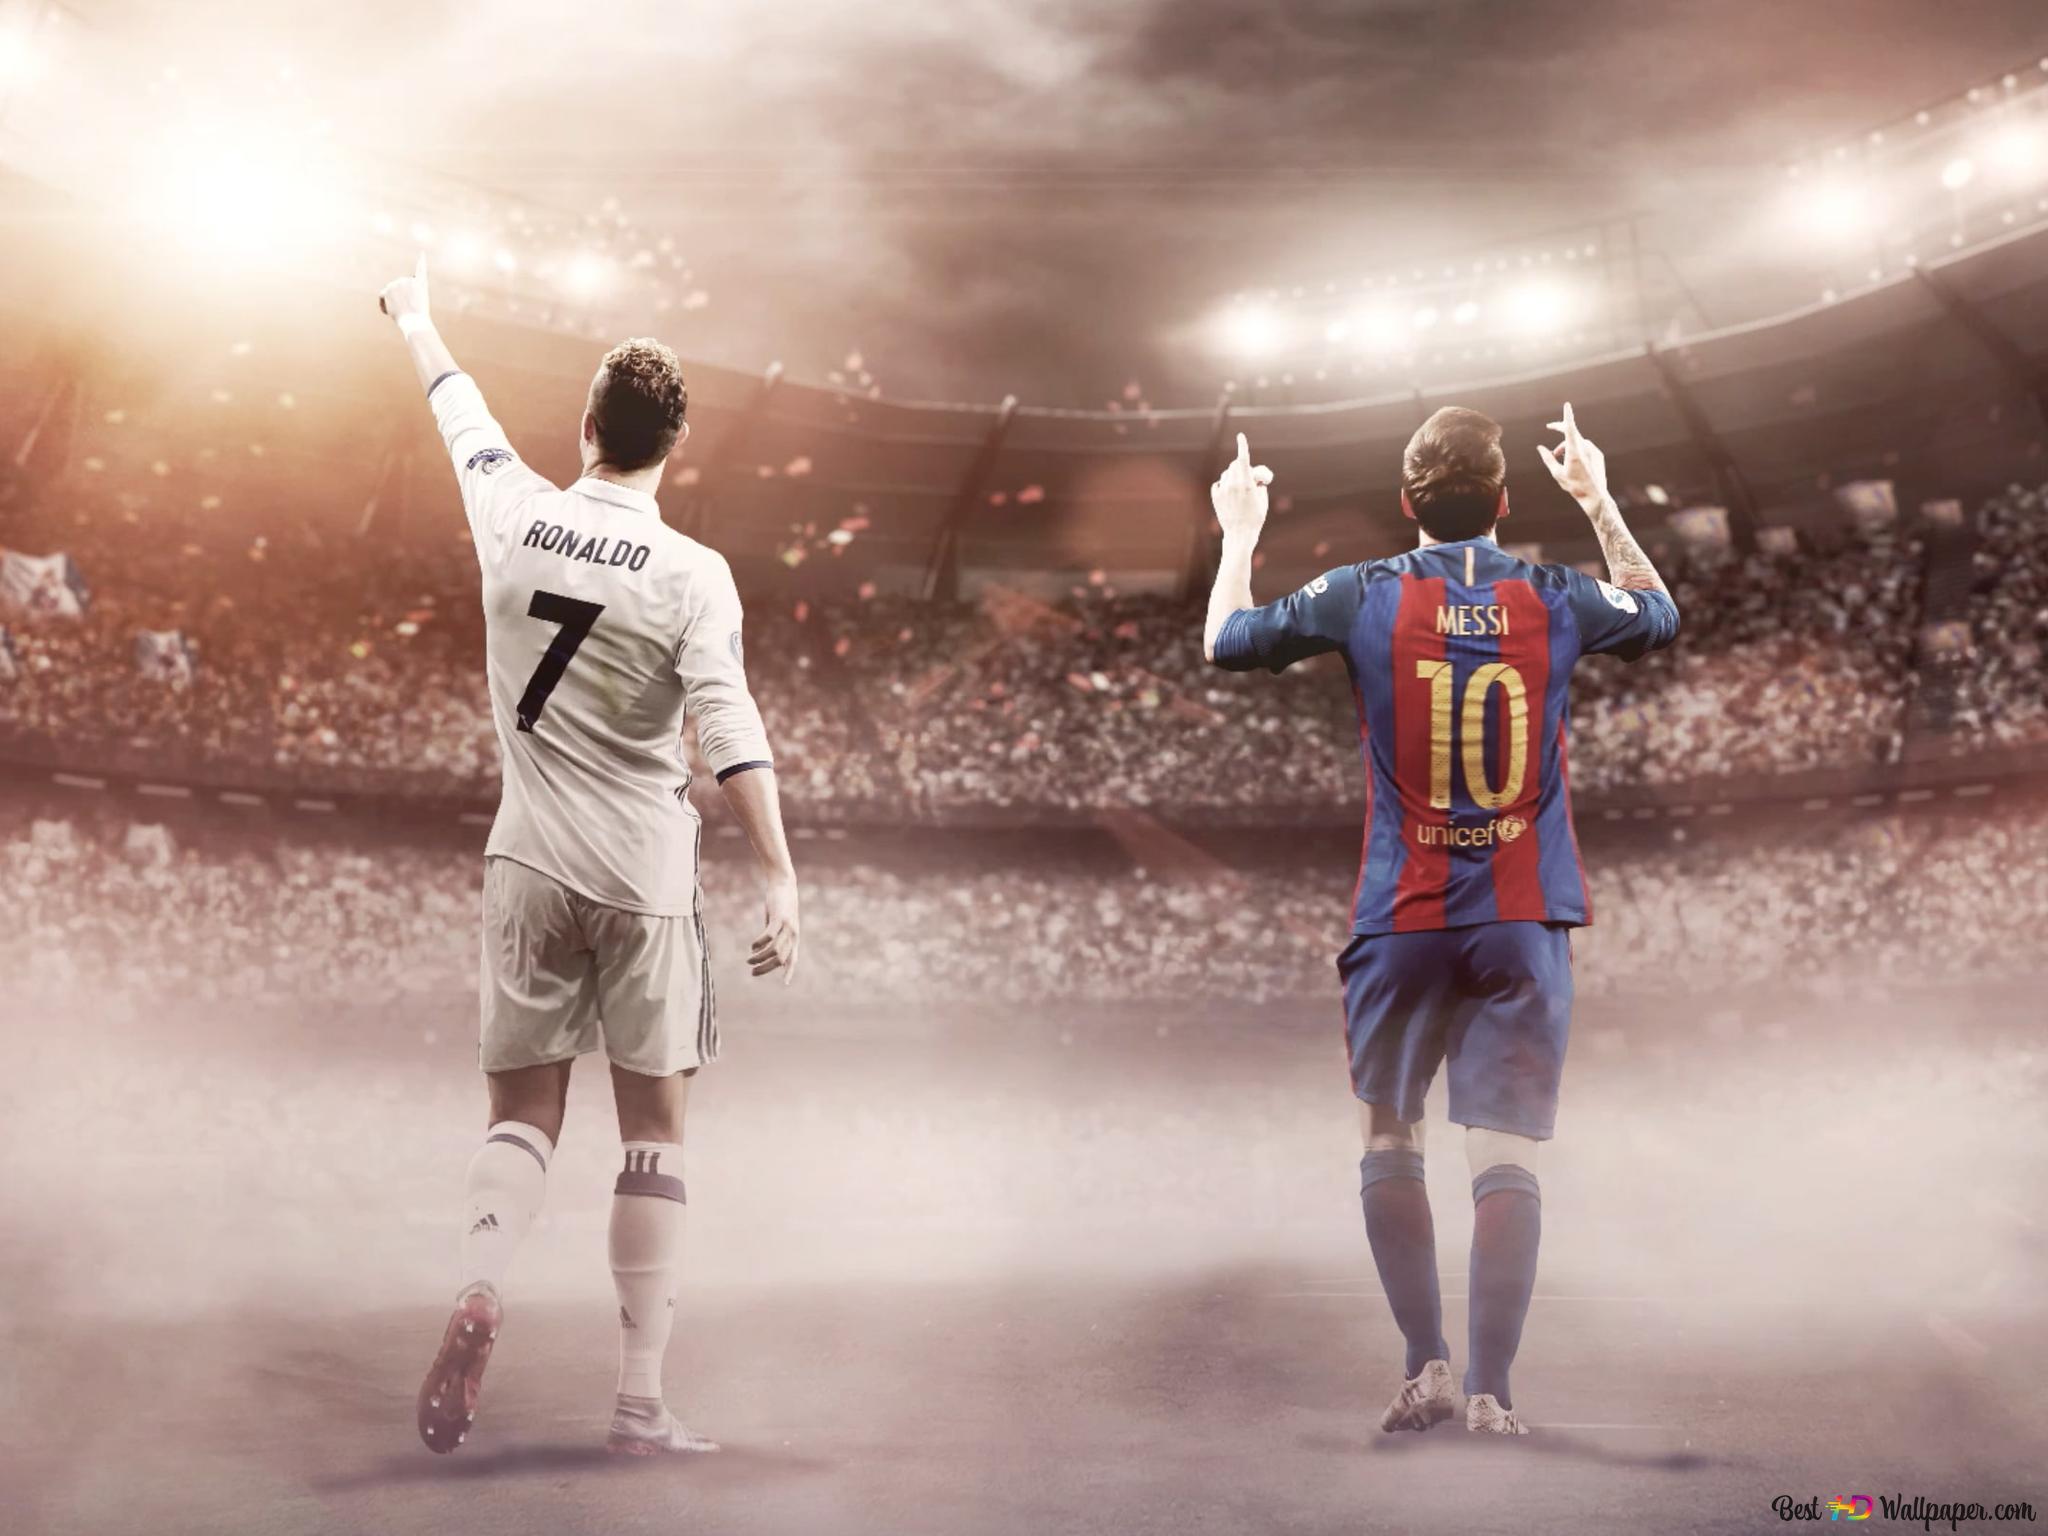 Messi and Ronaldo together cool wallpapers.